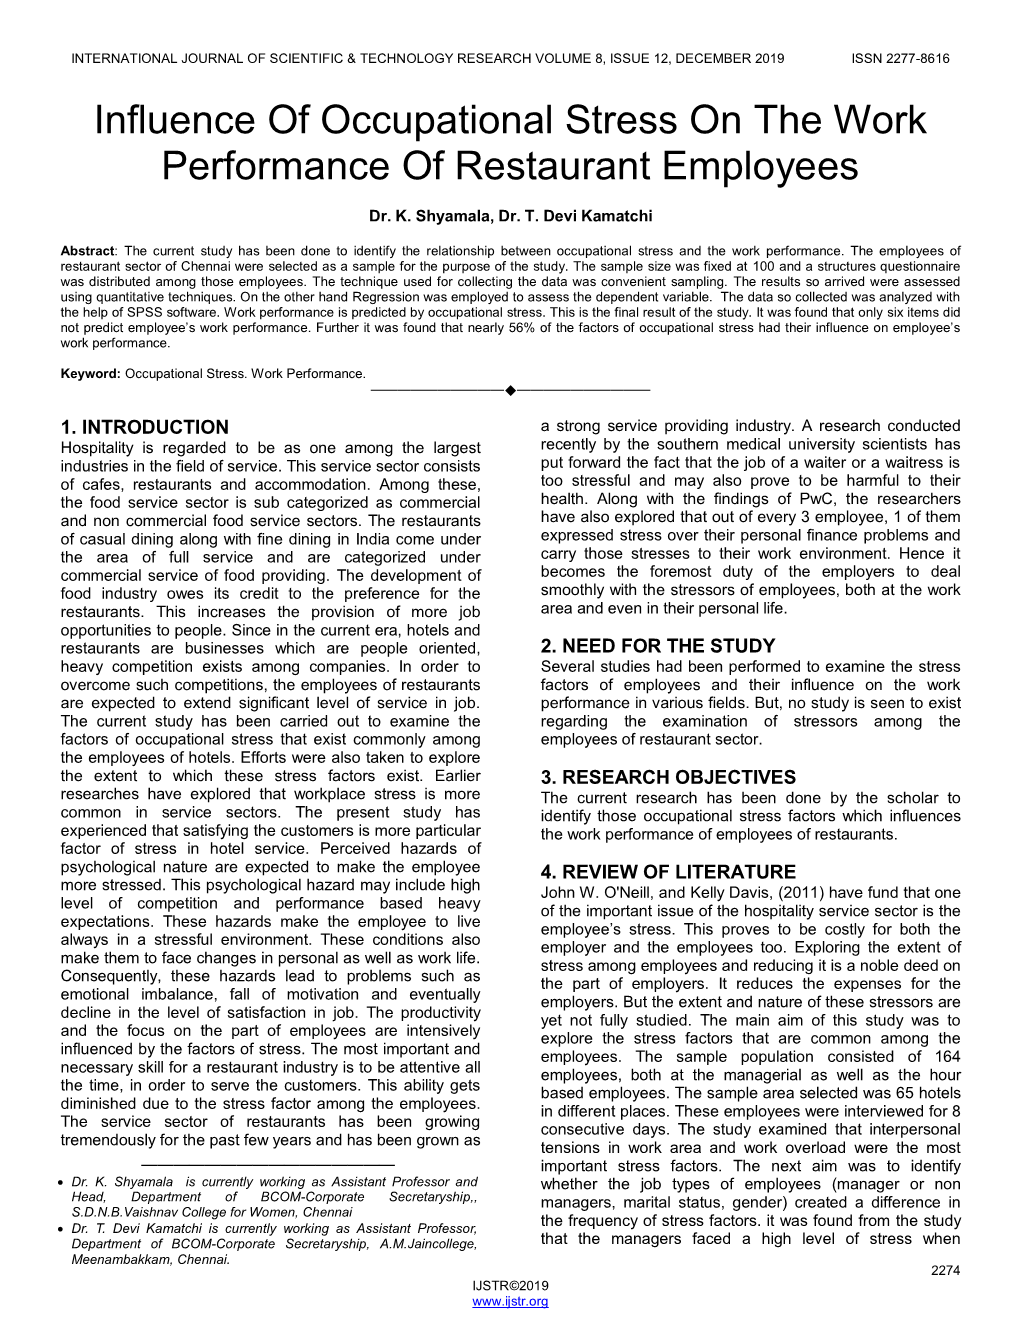 Influence of Occupational Stress on the Work Performance of Restaurant Employees